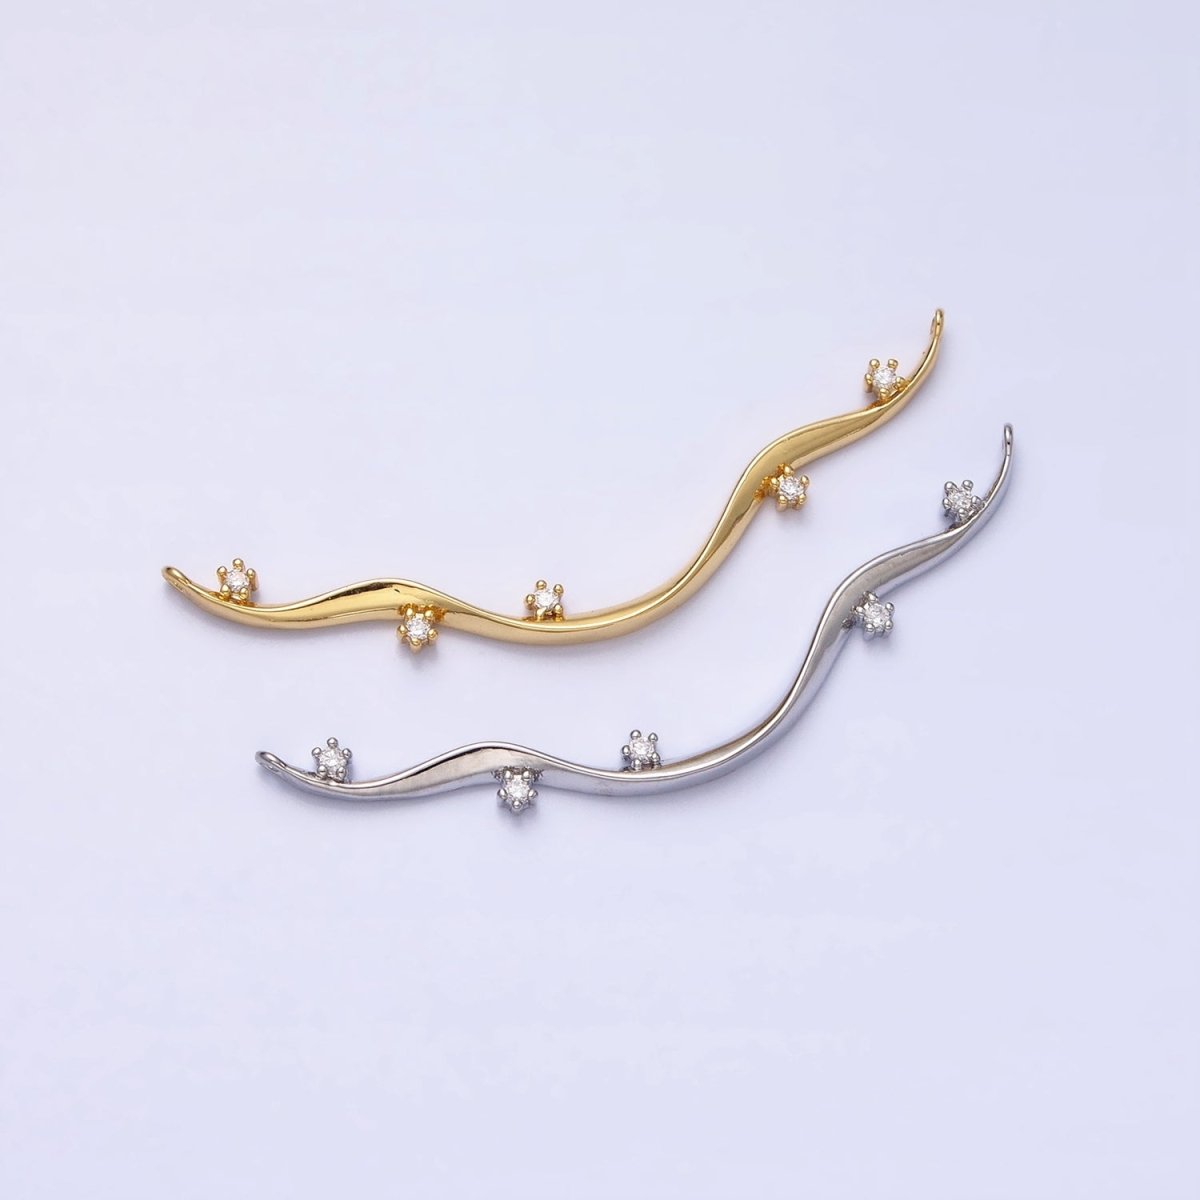 Thin Wavy Vine Gold Charm Connector for Necklace Component with Cz Stone for Minimalist Jewelry AA908 AA909 - DLUXCA